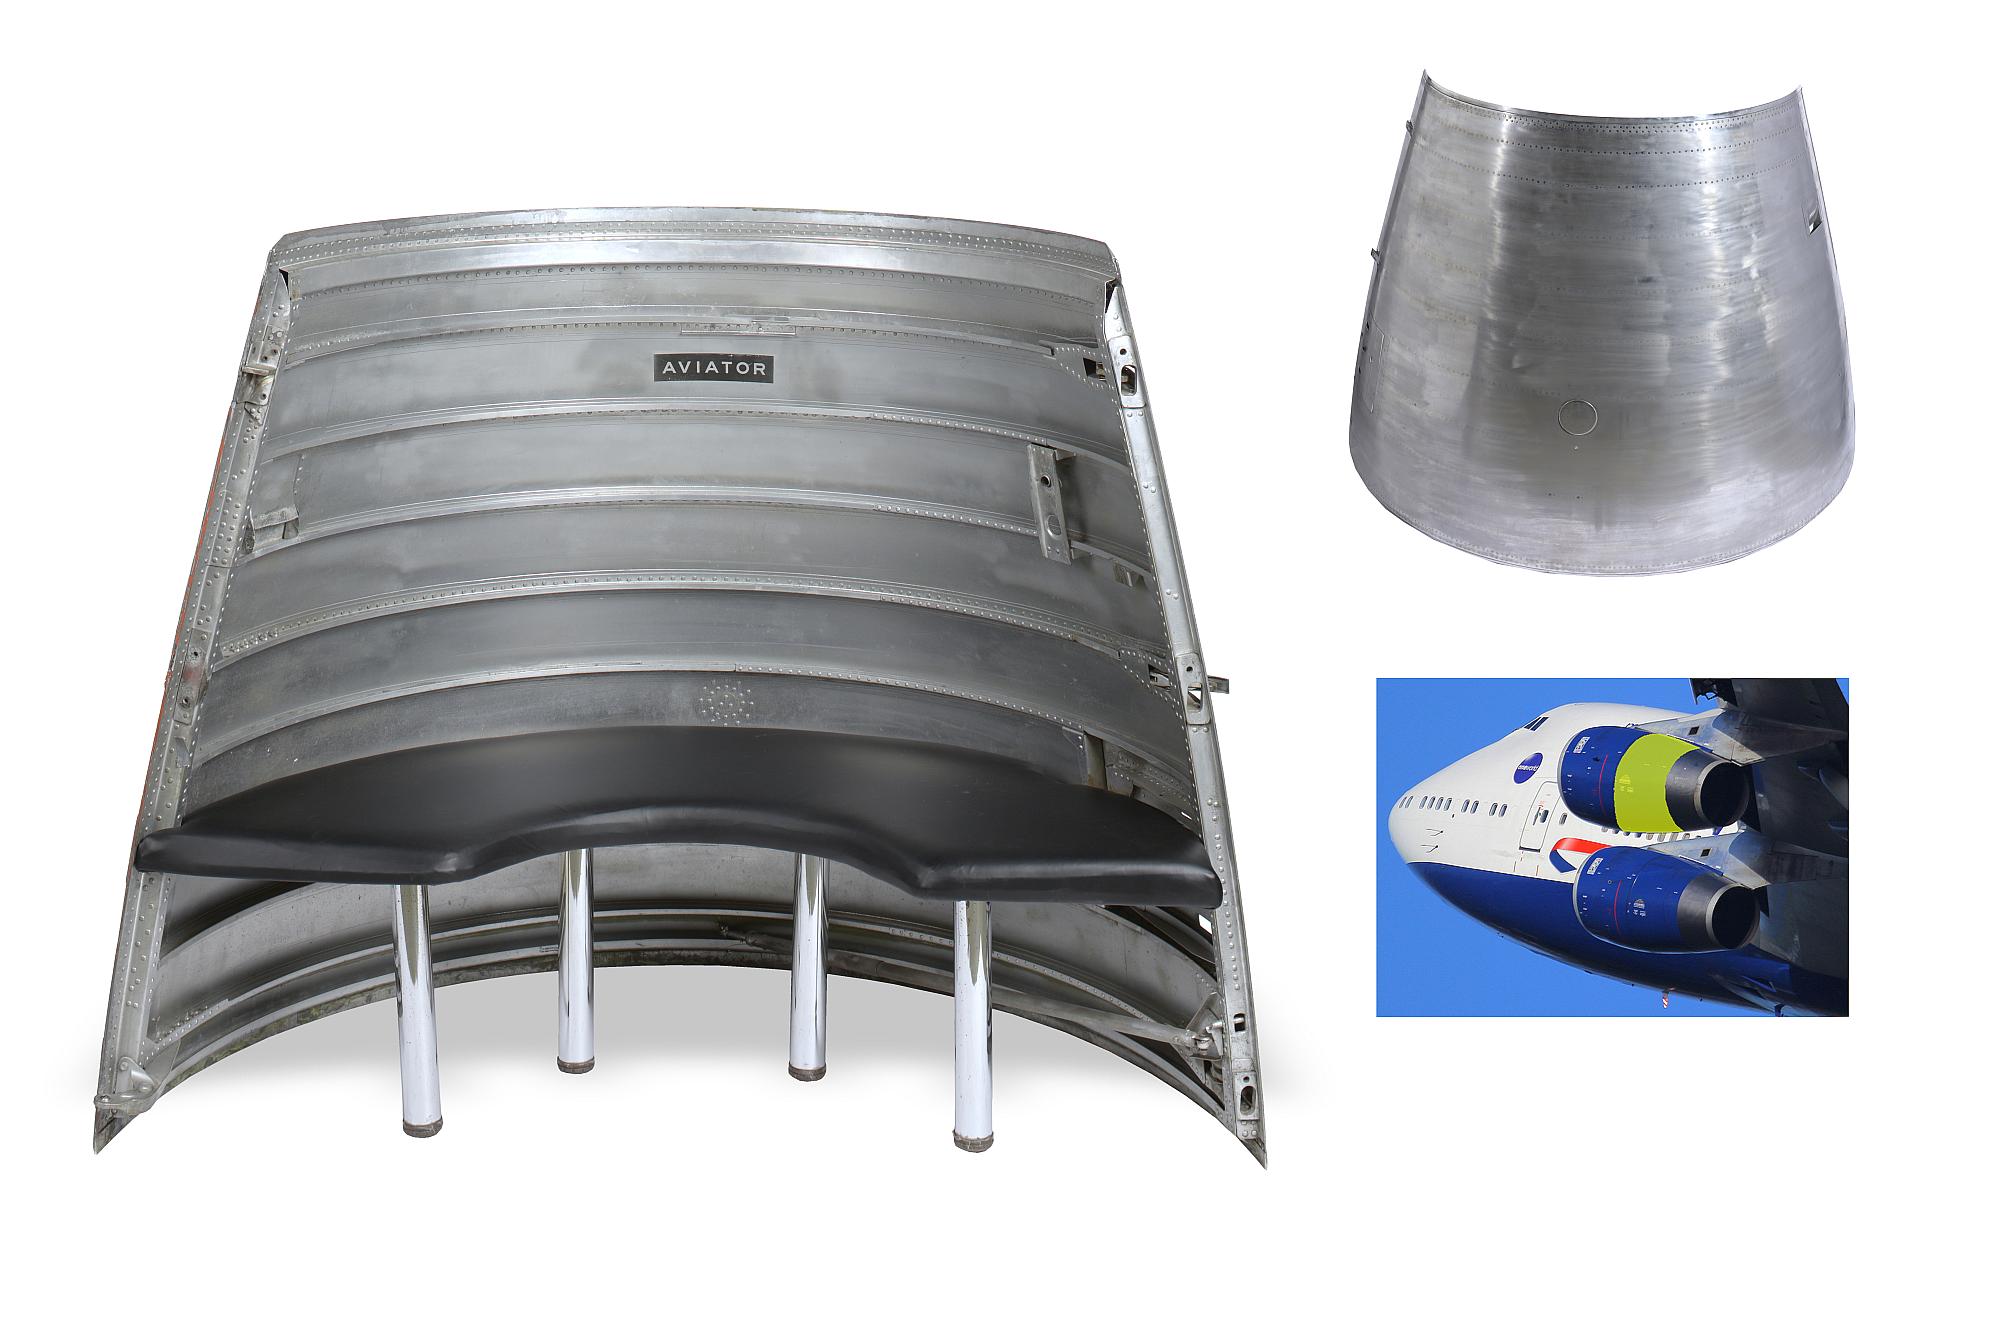 Toys for Boys: An aluminium and upholstered seat created from the cowling of an RB211 jet engine